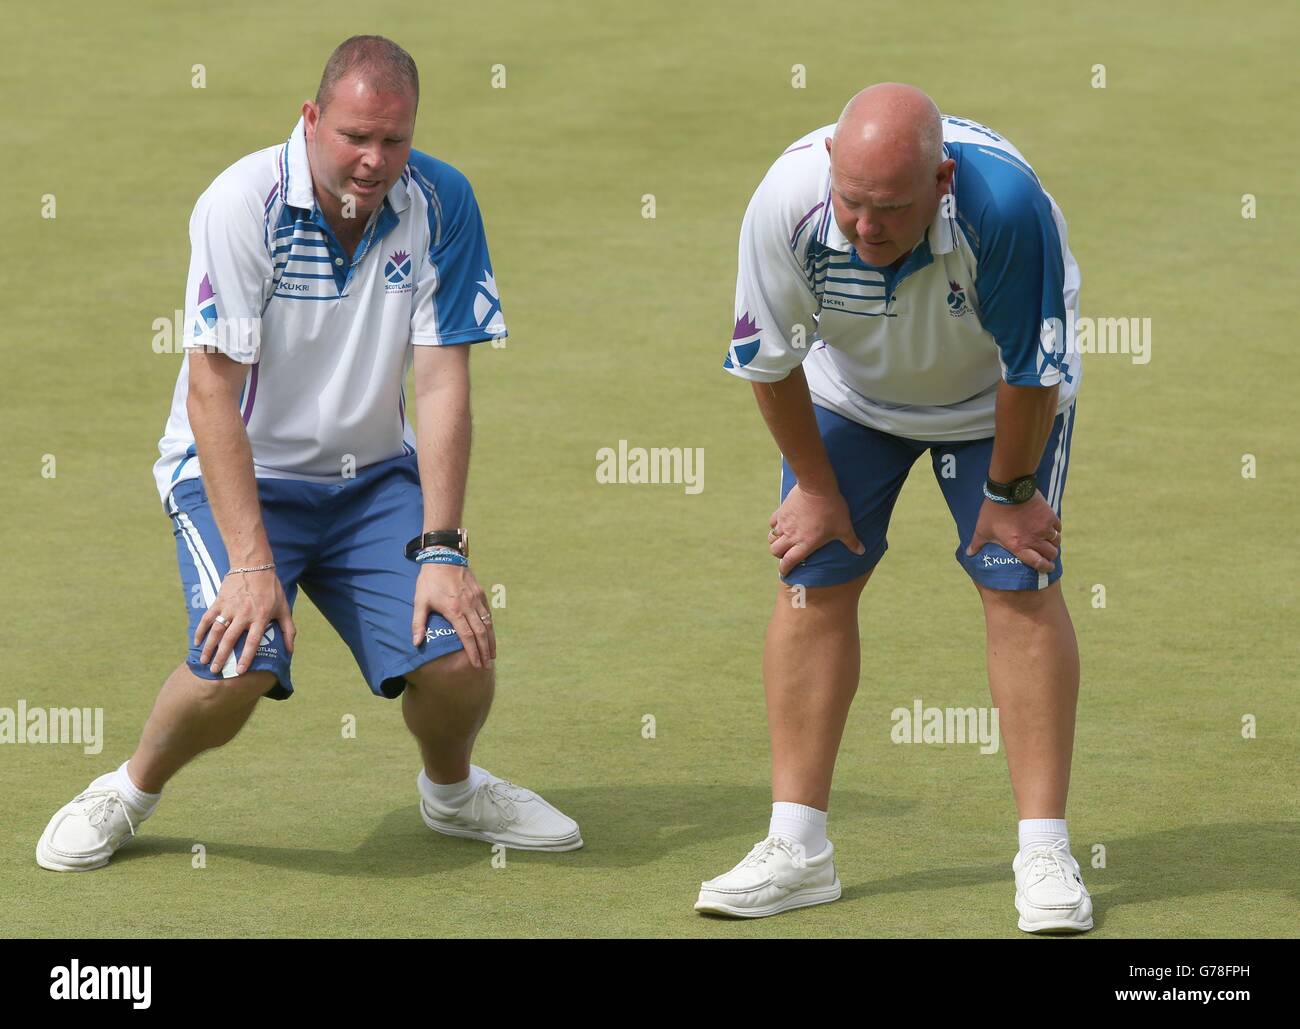 Scotland's Paul Foster and Alex Marshall (right) in the Men's Fours final at Kelvingrove Lawn Bowls Centre, during the 2014 Commonwealth Games in Glasgow. Stock Photo